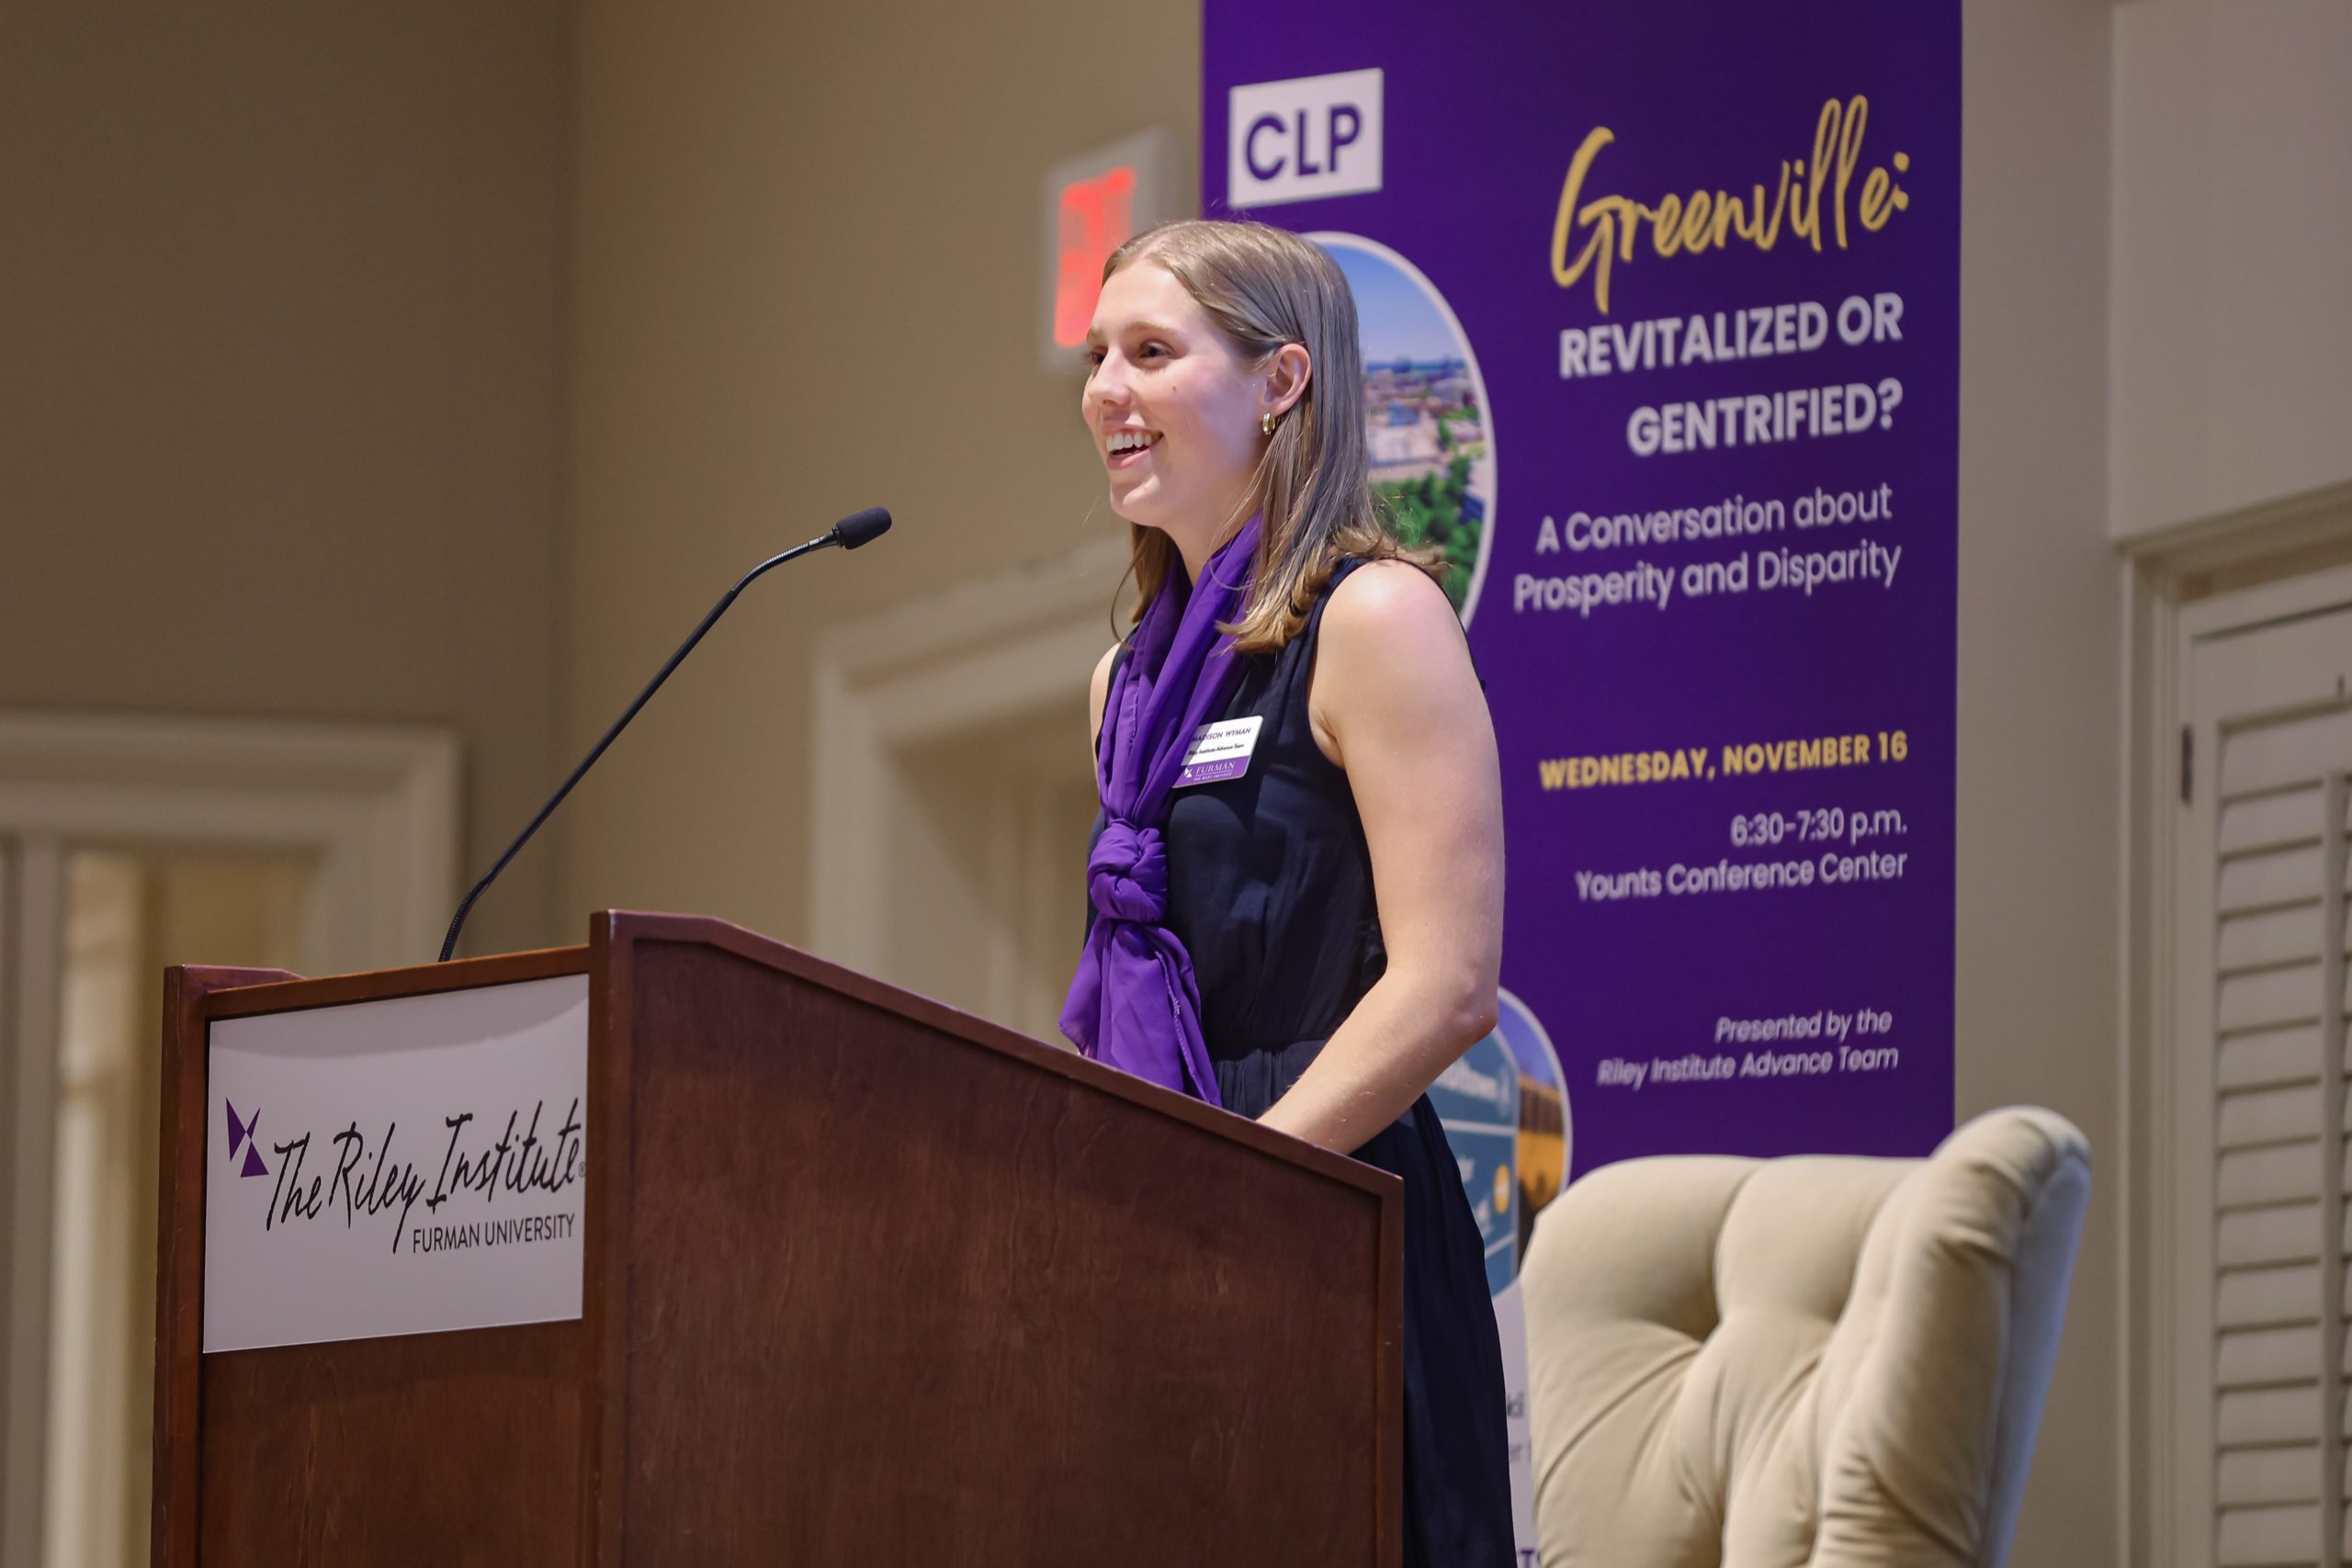 Advance Team lead Madison Wyman opened the event with remarks on the prevalence of gentrification in Greenville and the importance of student and community awareness as Greenville continues to grow.